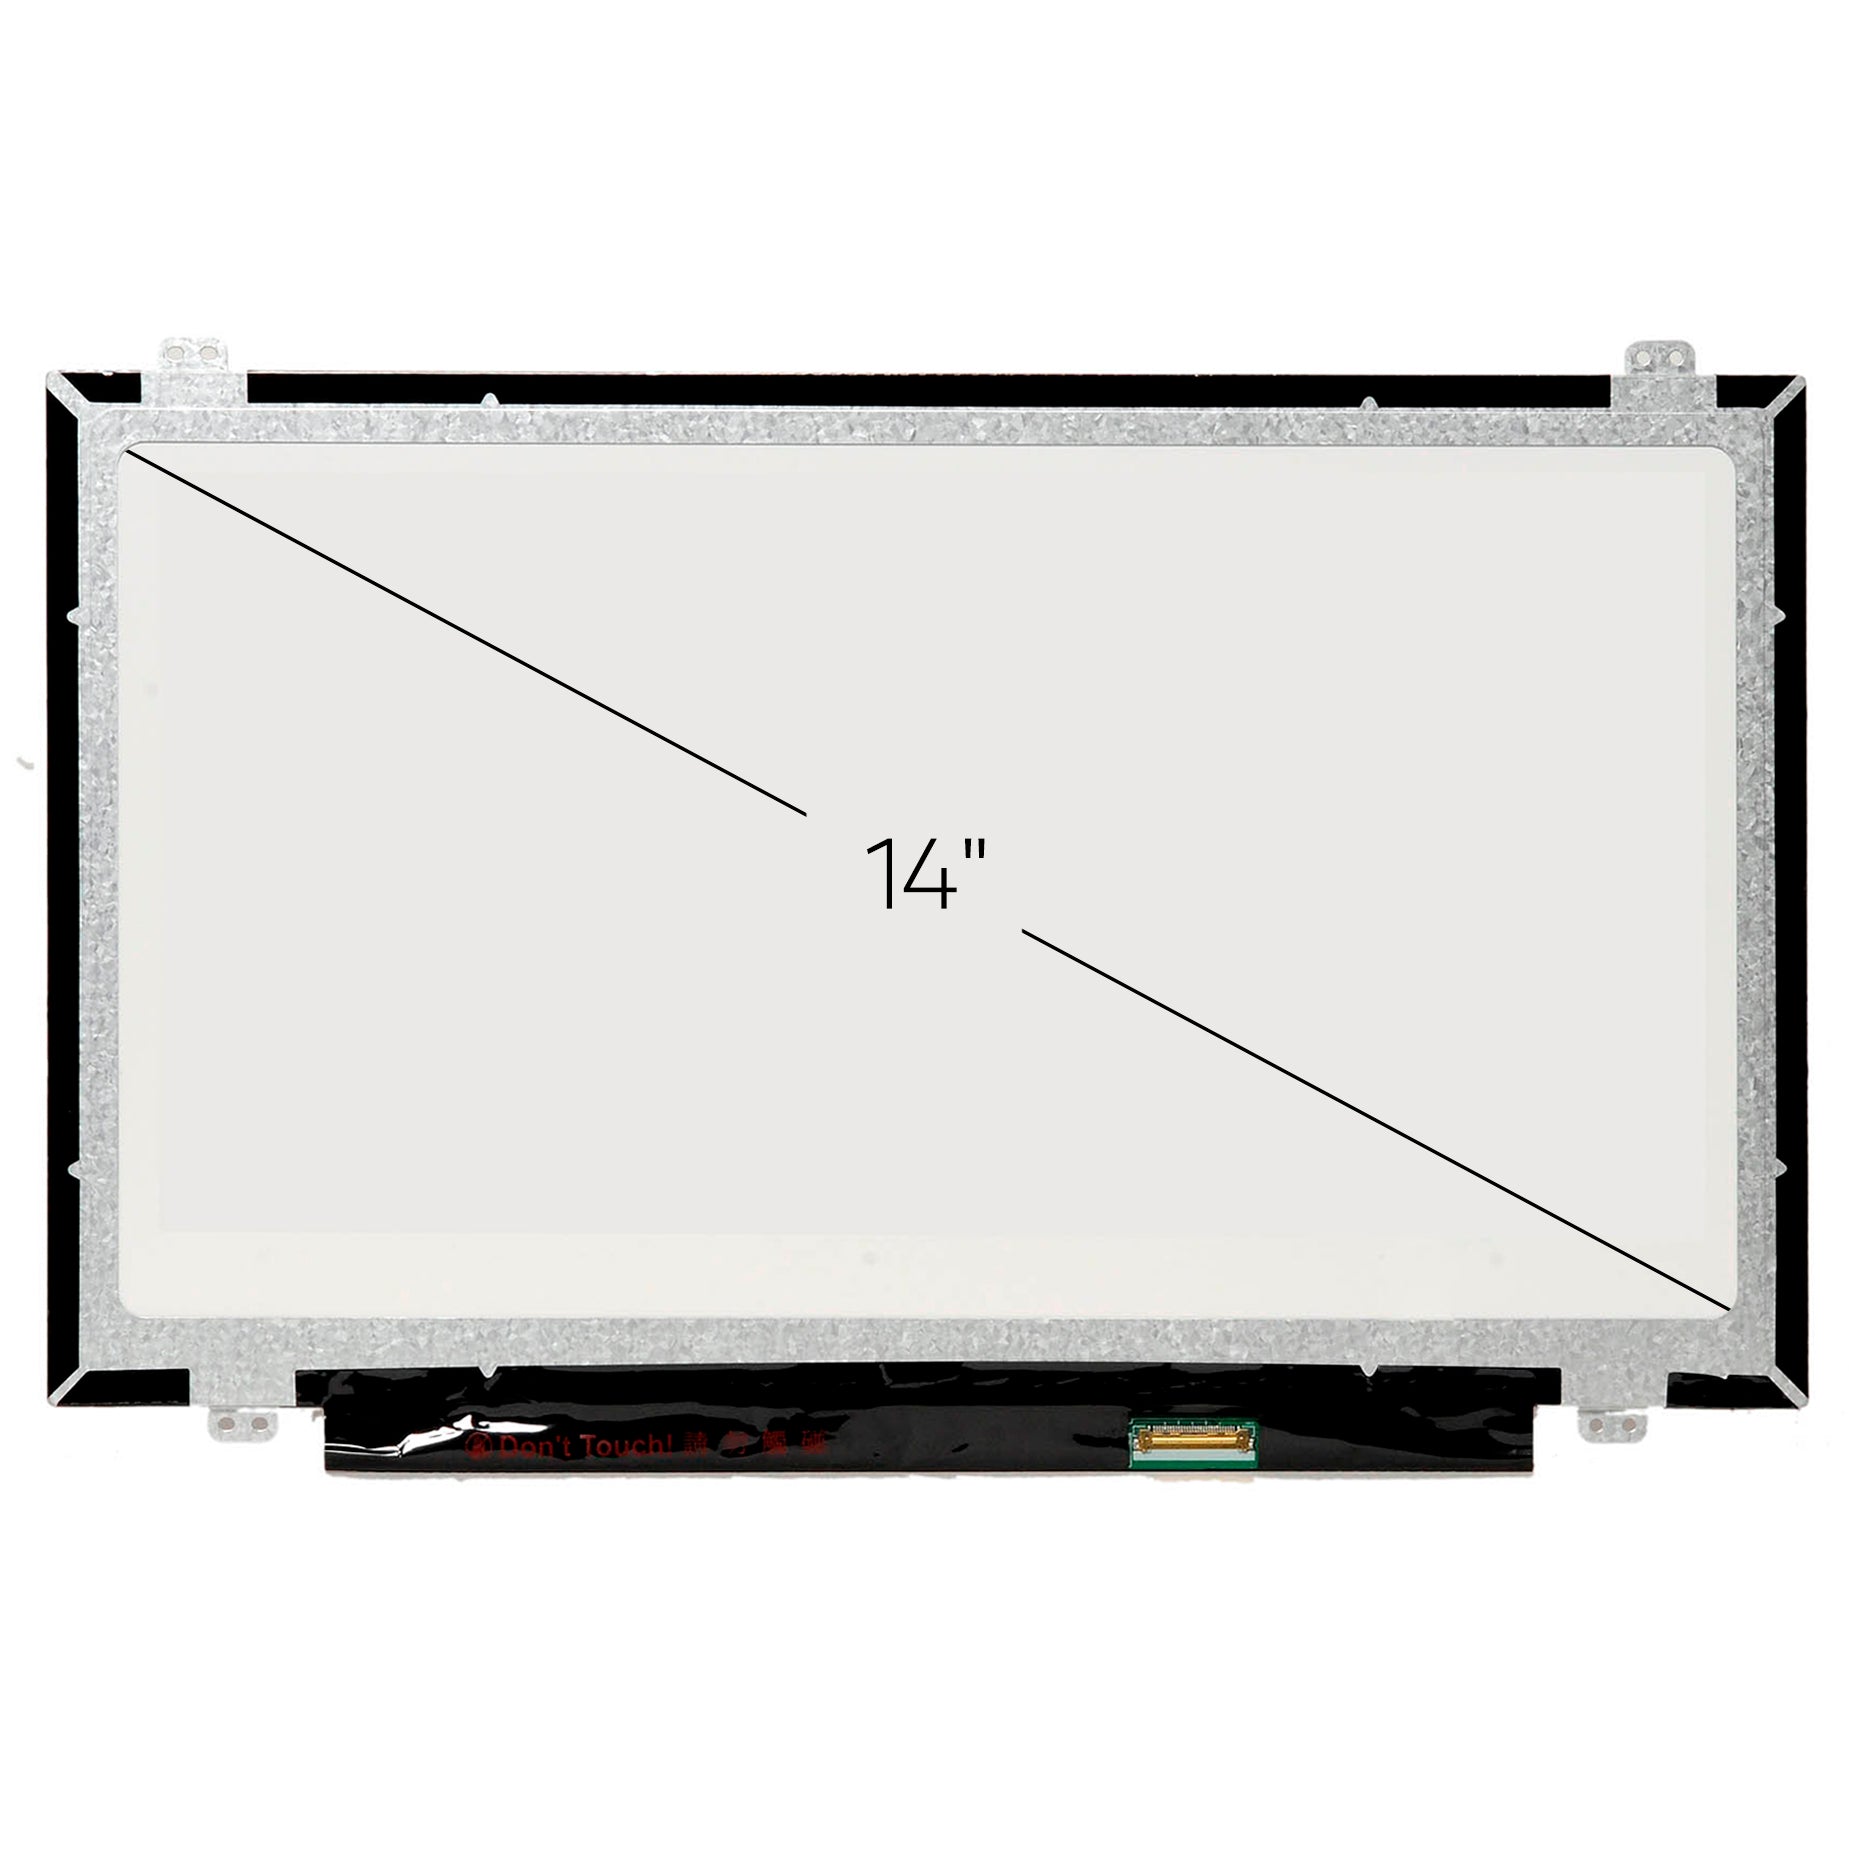 Screen Replacement for Lenovo Chromebook N42 HD 1366x768 Glossy LCD LED Display